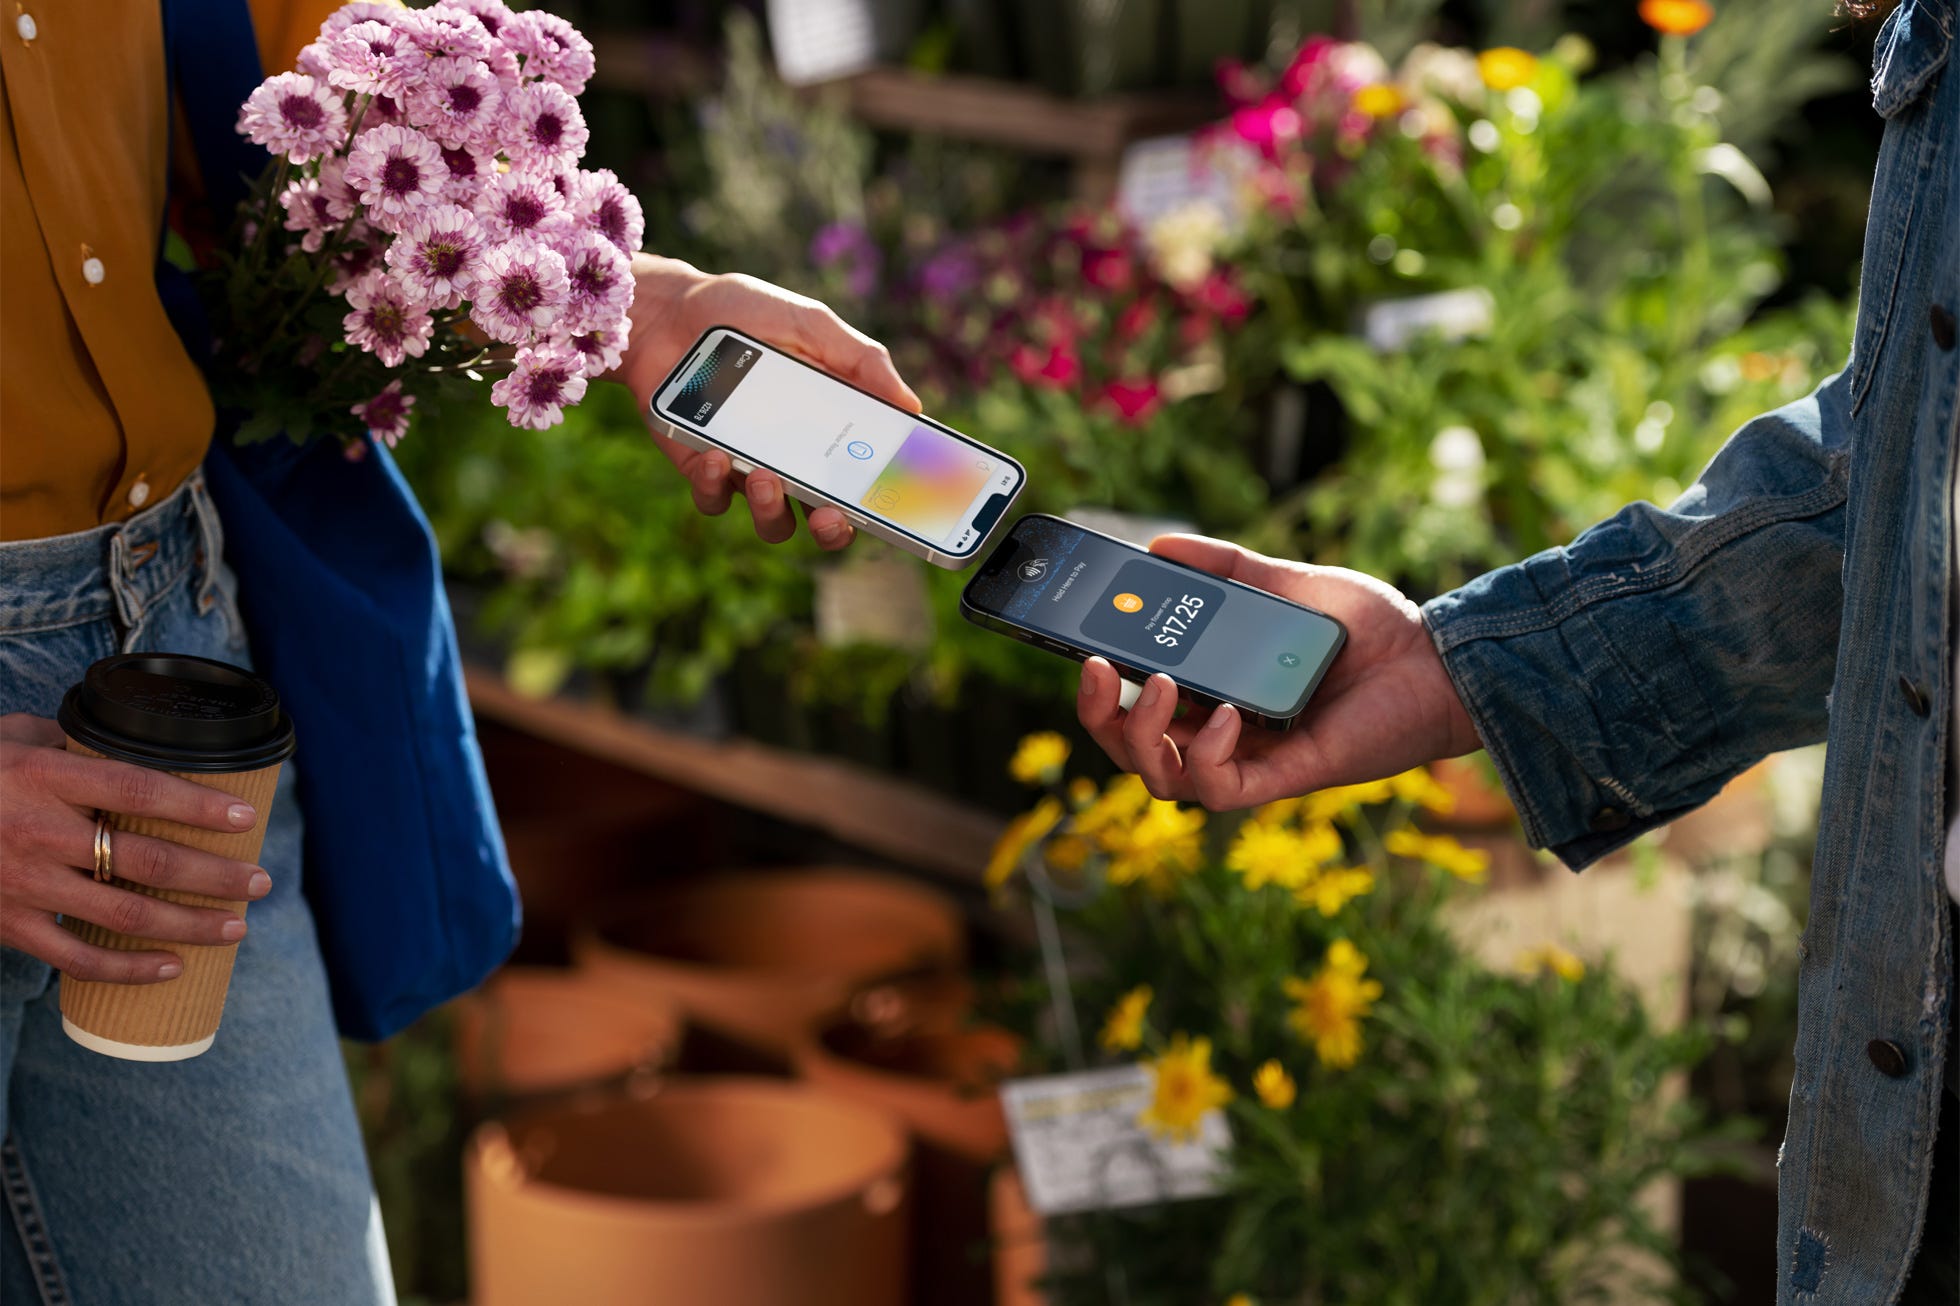 Tap to Pay on iPhone enables businesses to seamlessly and securely accept Apple Pay, contactless credit and debit cards, and other digital wallets through a simple tap to their iPhone.